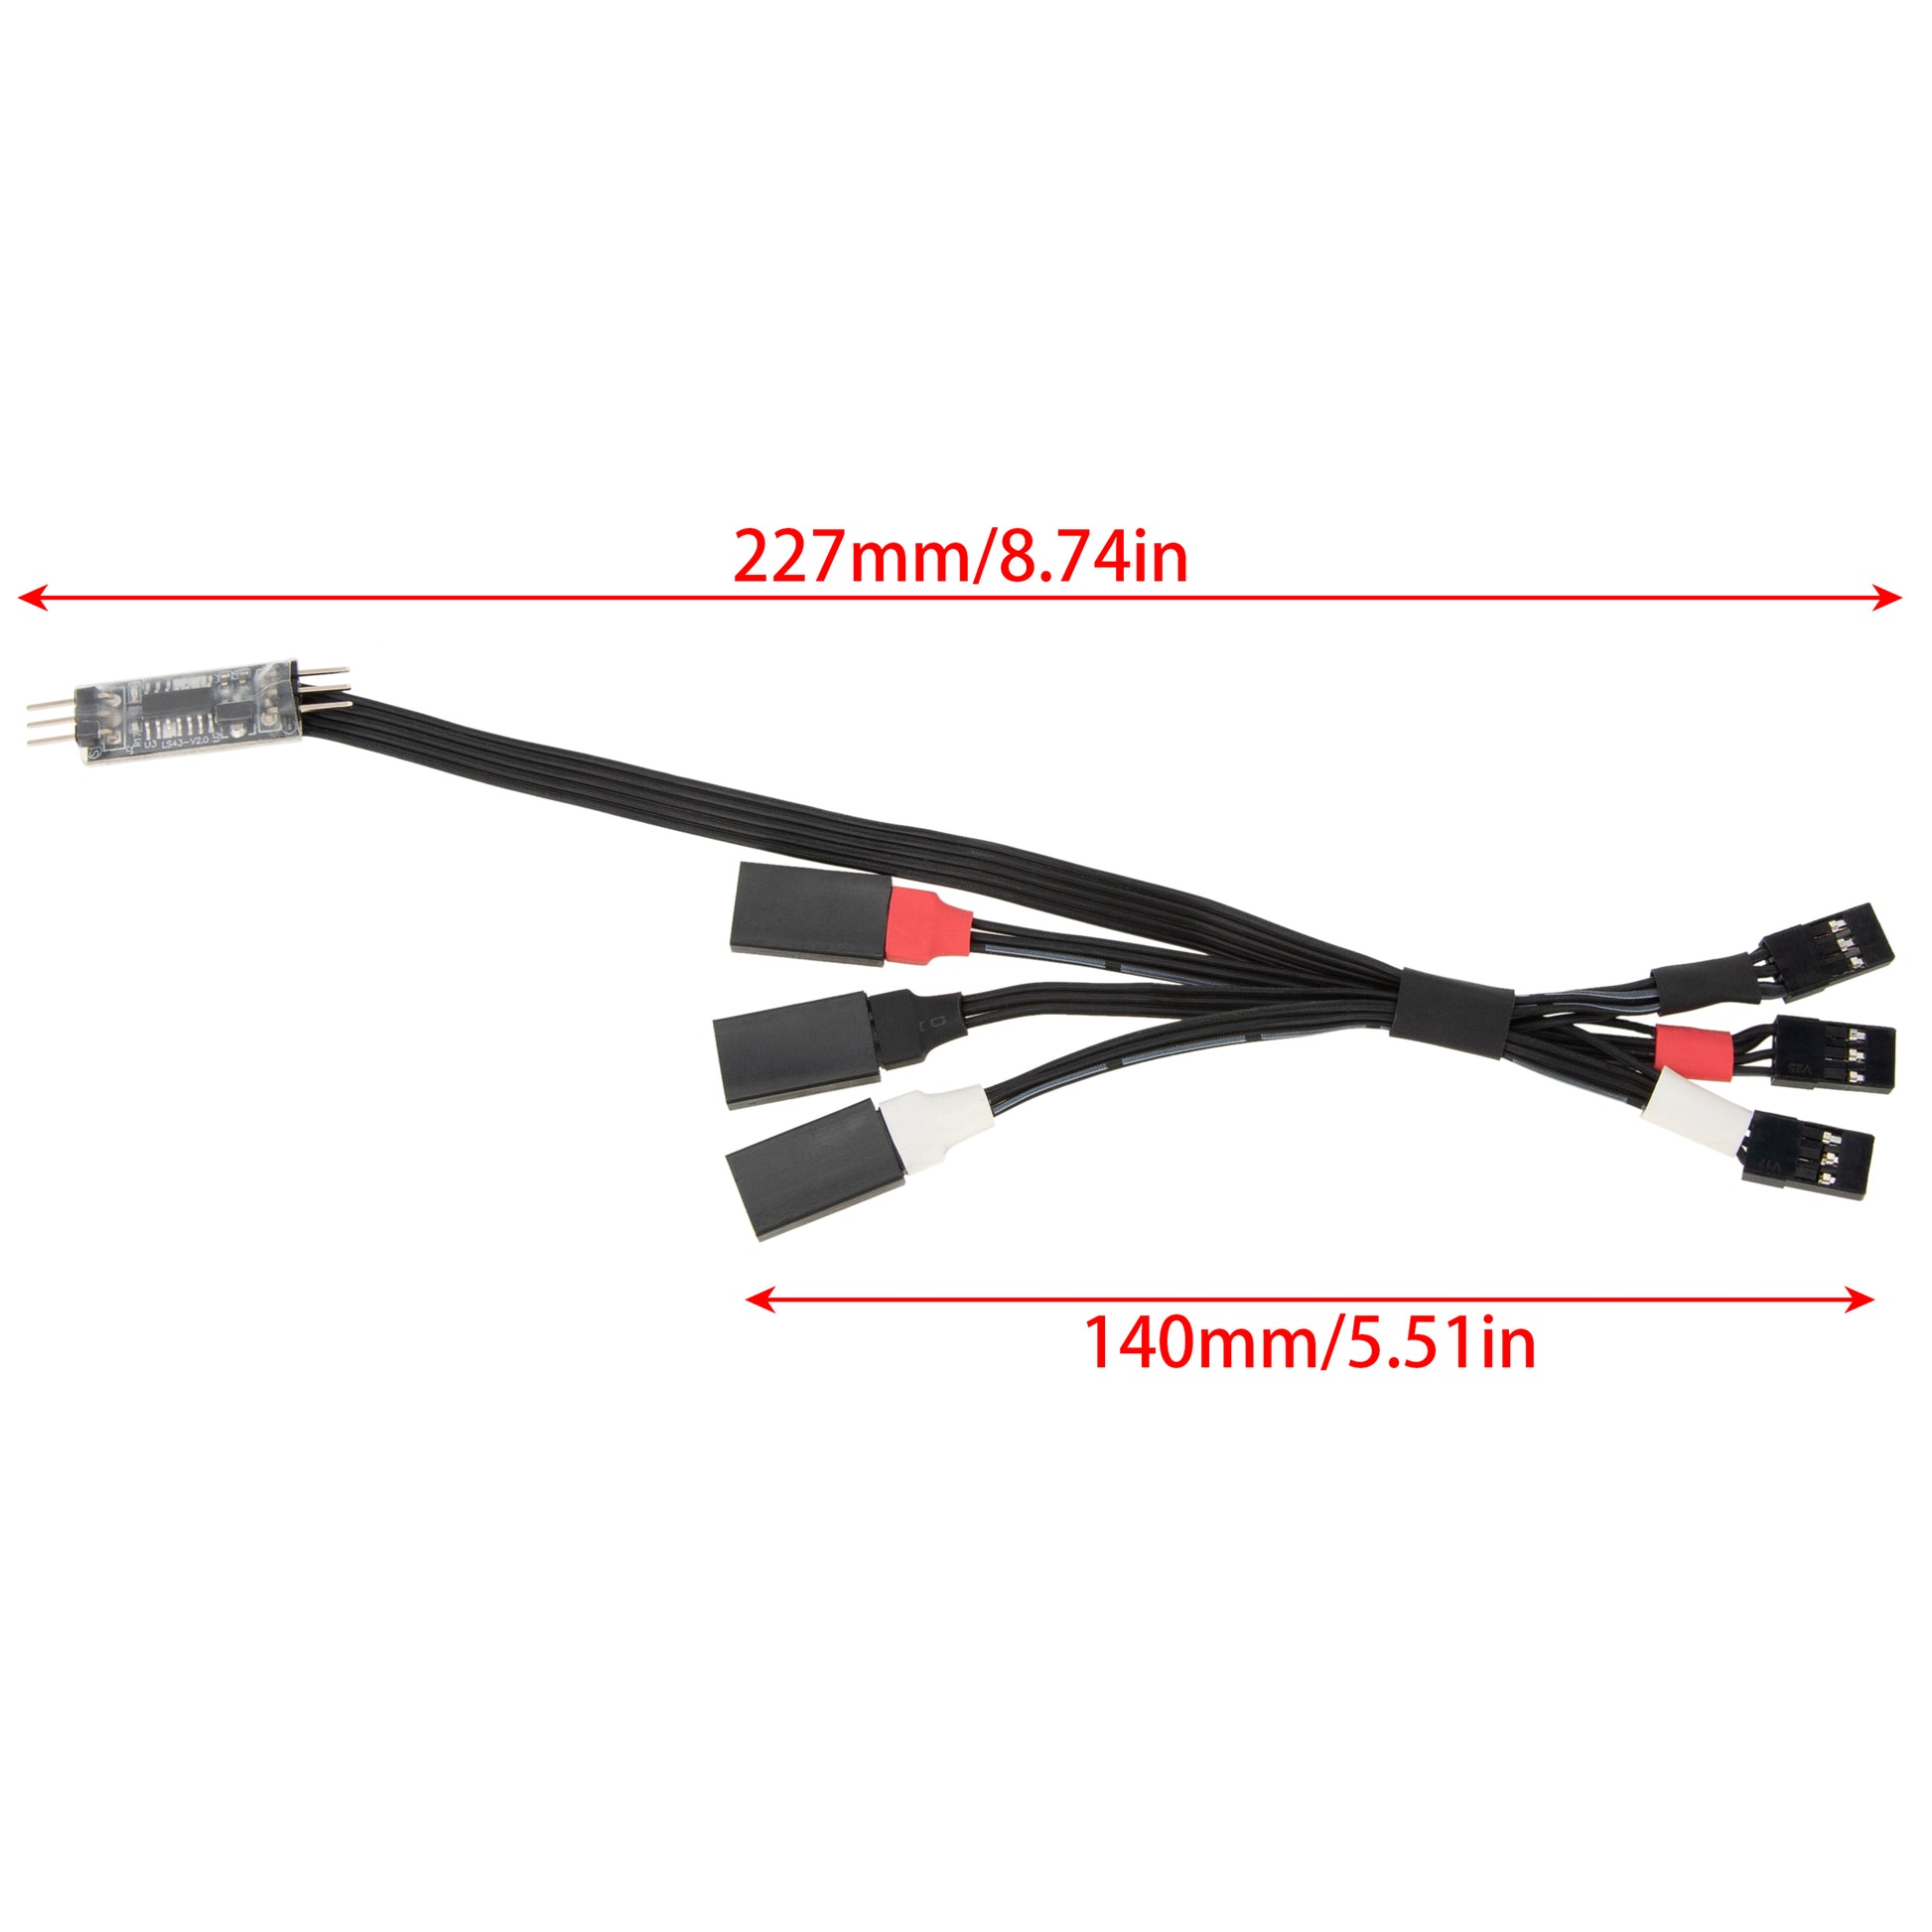 Four-wheel steering control cable size for TRX4M